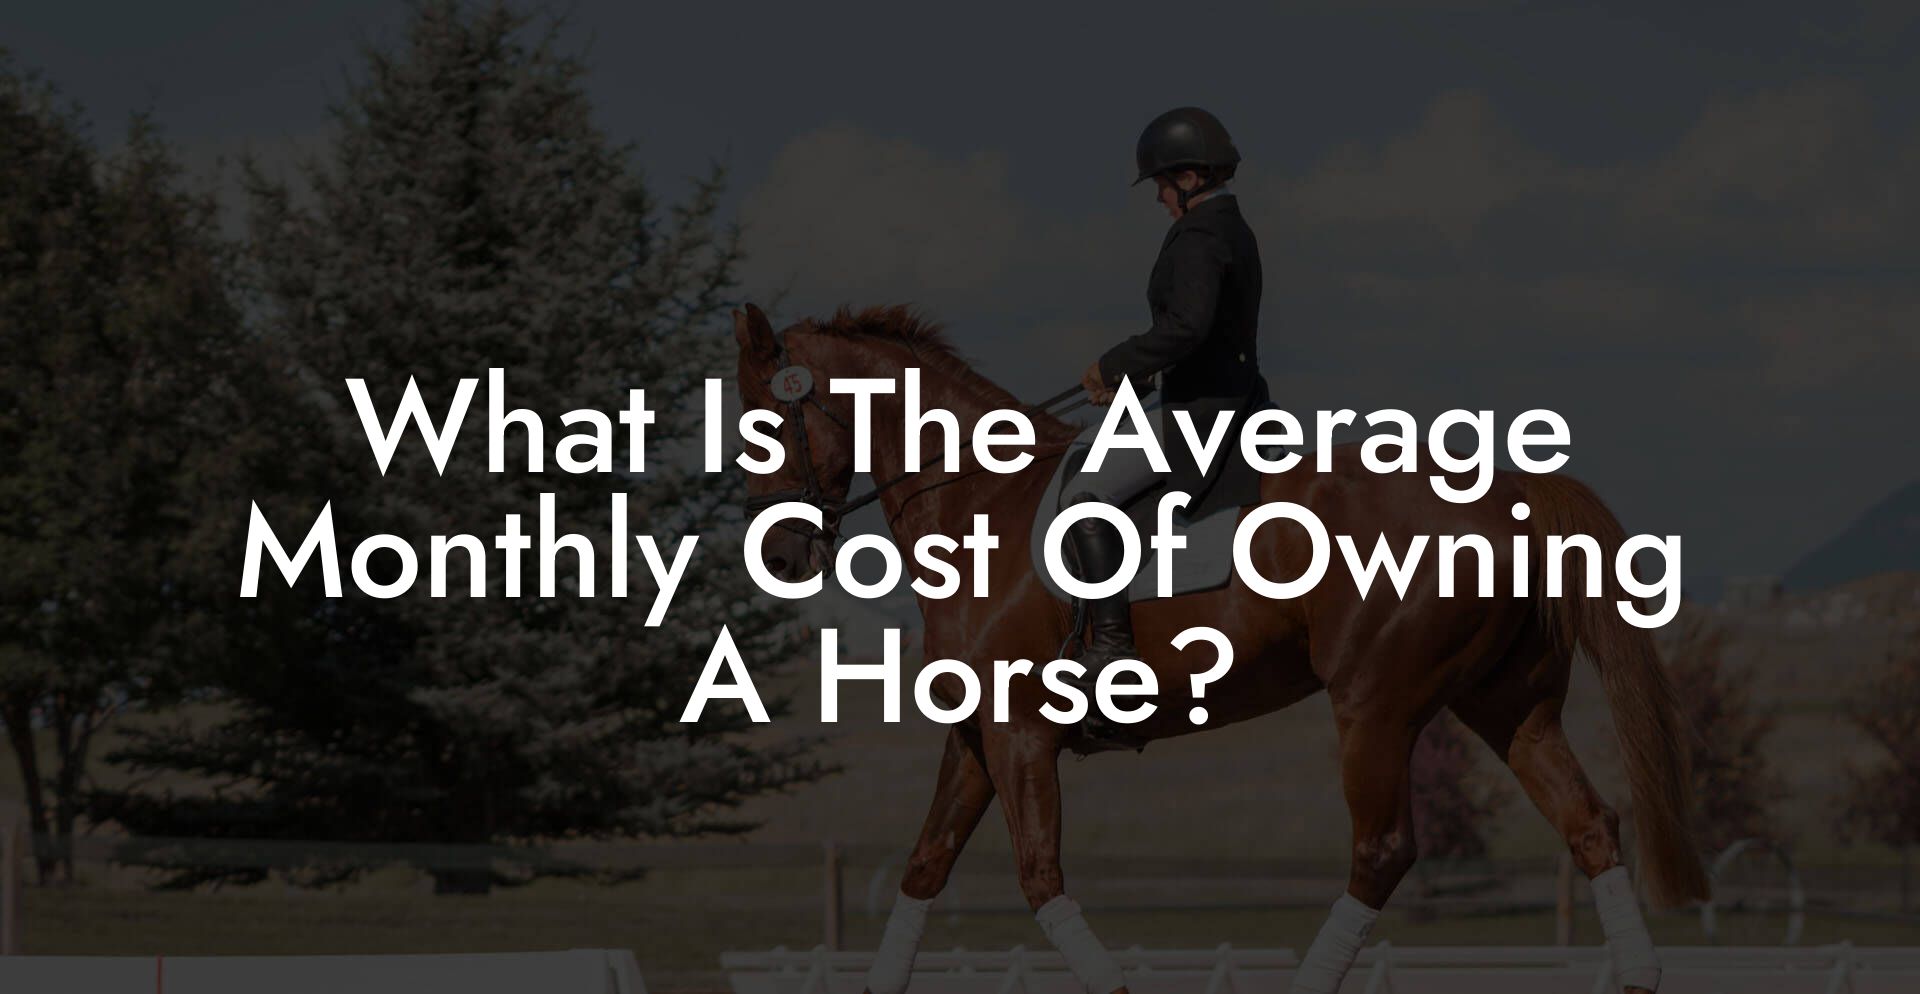 What Is The Average Monthly Cost Of Owning A Horse?